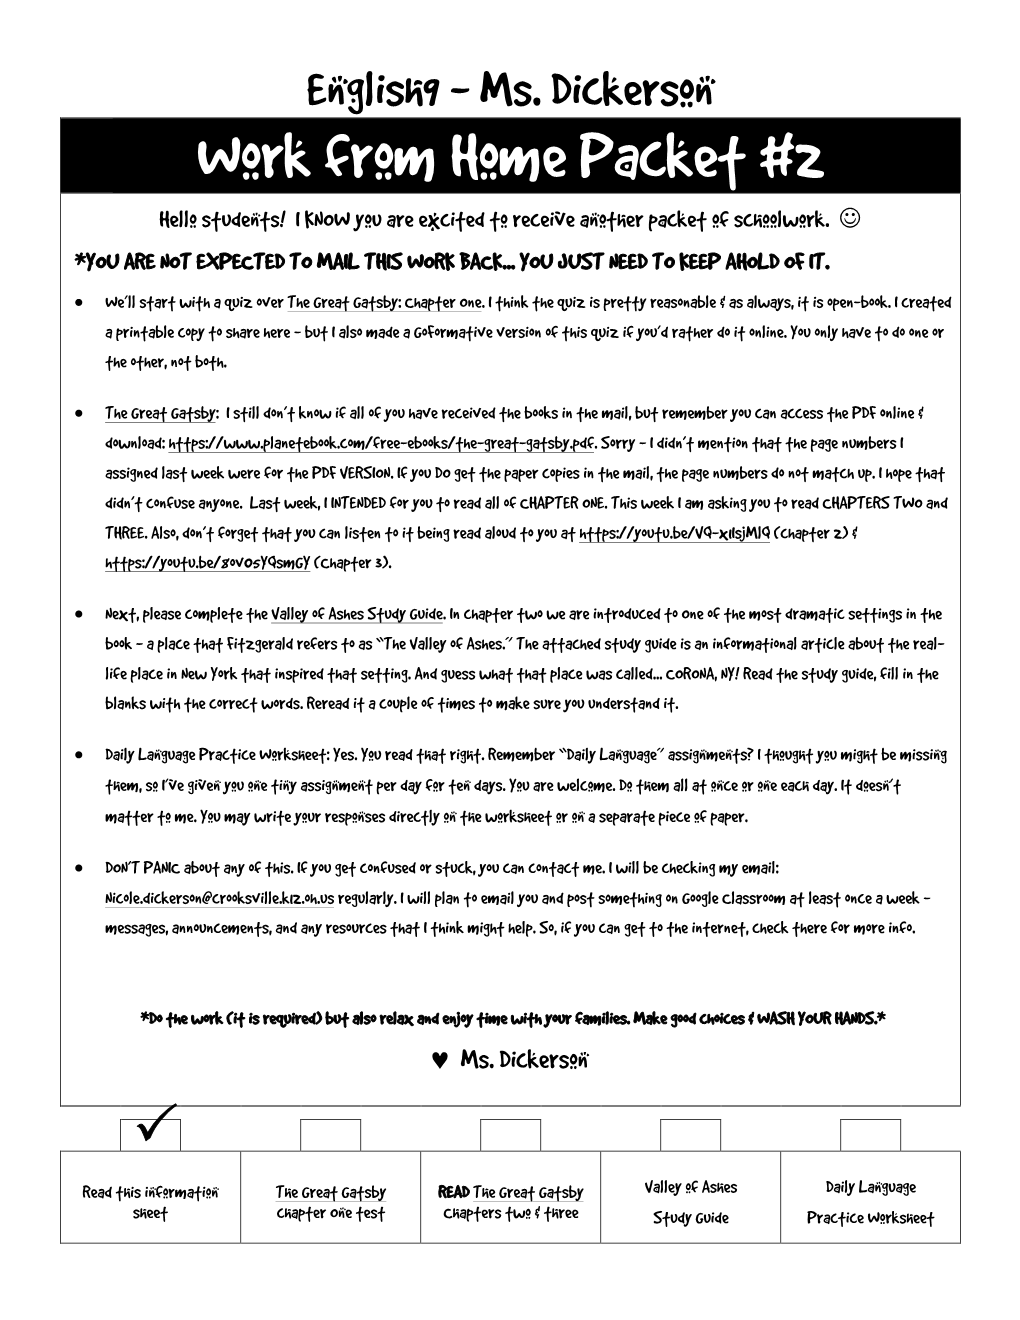 Work from Home Packet #2 Hello Students! I KNOW You Are Excited to Receive Another Packet of Schoolwork